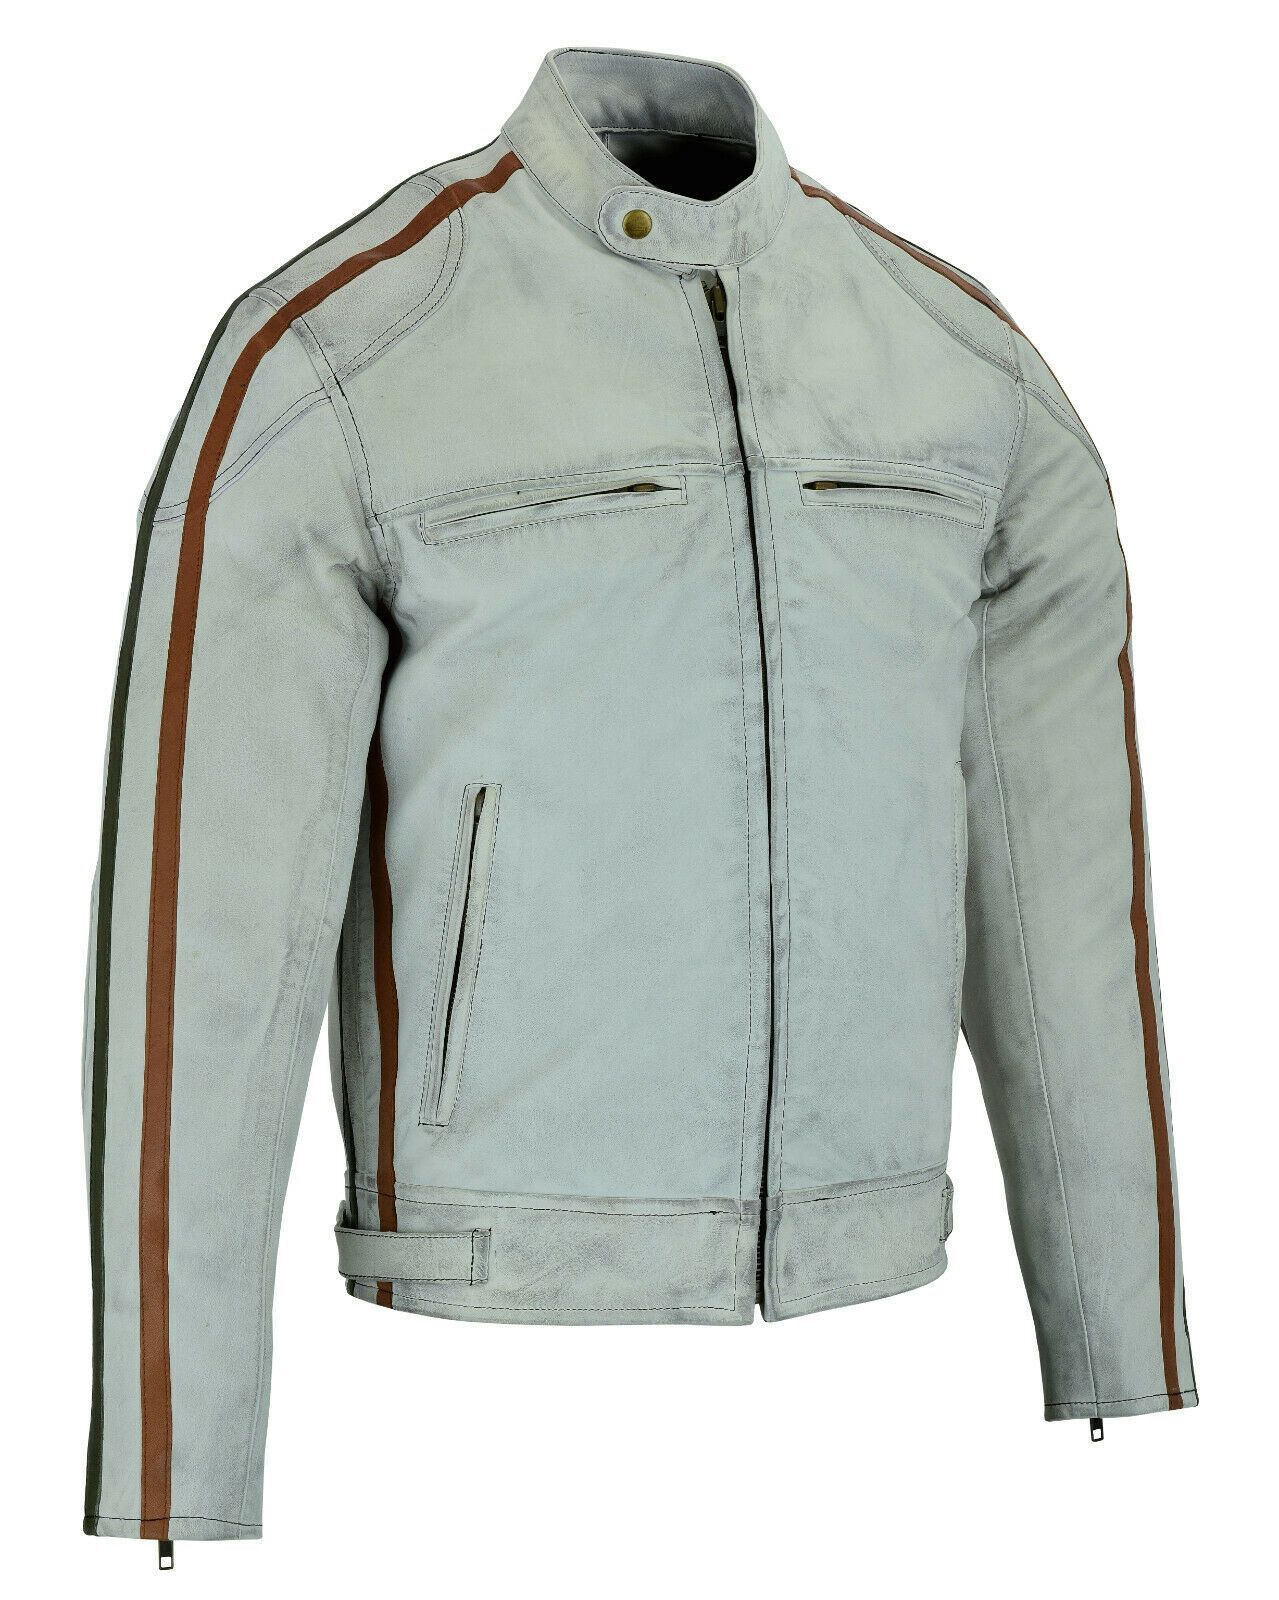 Classic Mens Dirty Grey Motorcycle Leather Jacket Biker Tan and Green stripes